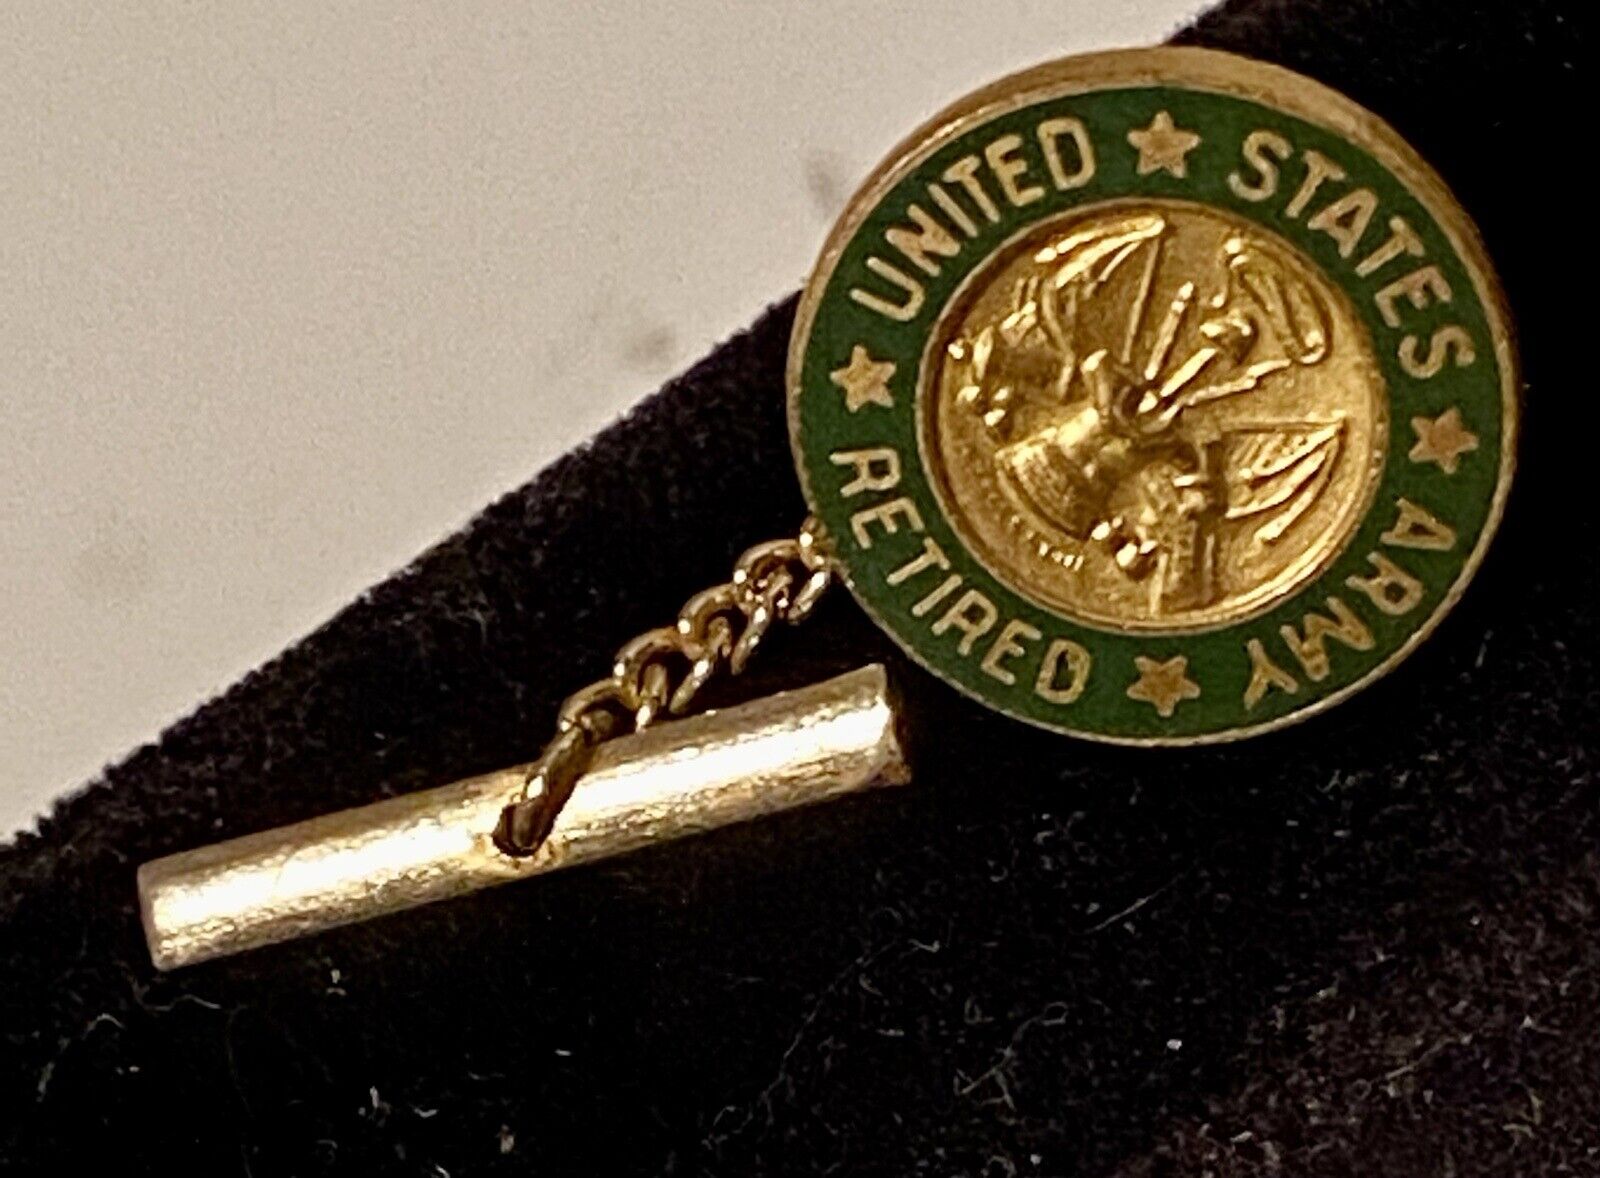 United States Army Retired Lapel Pin Hat Pin Tie Tac US Army Pin Collectible